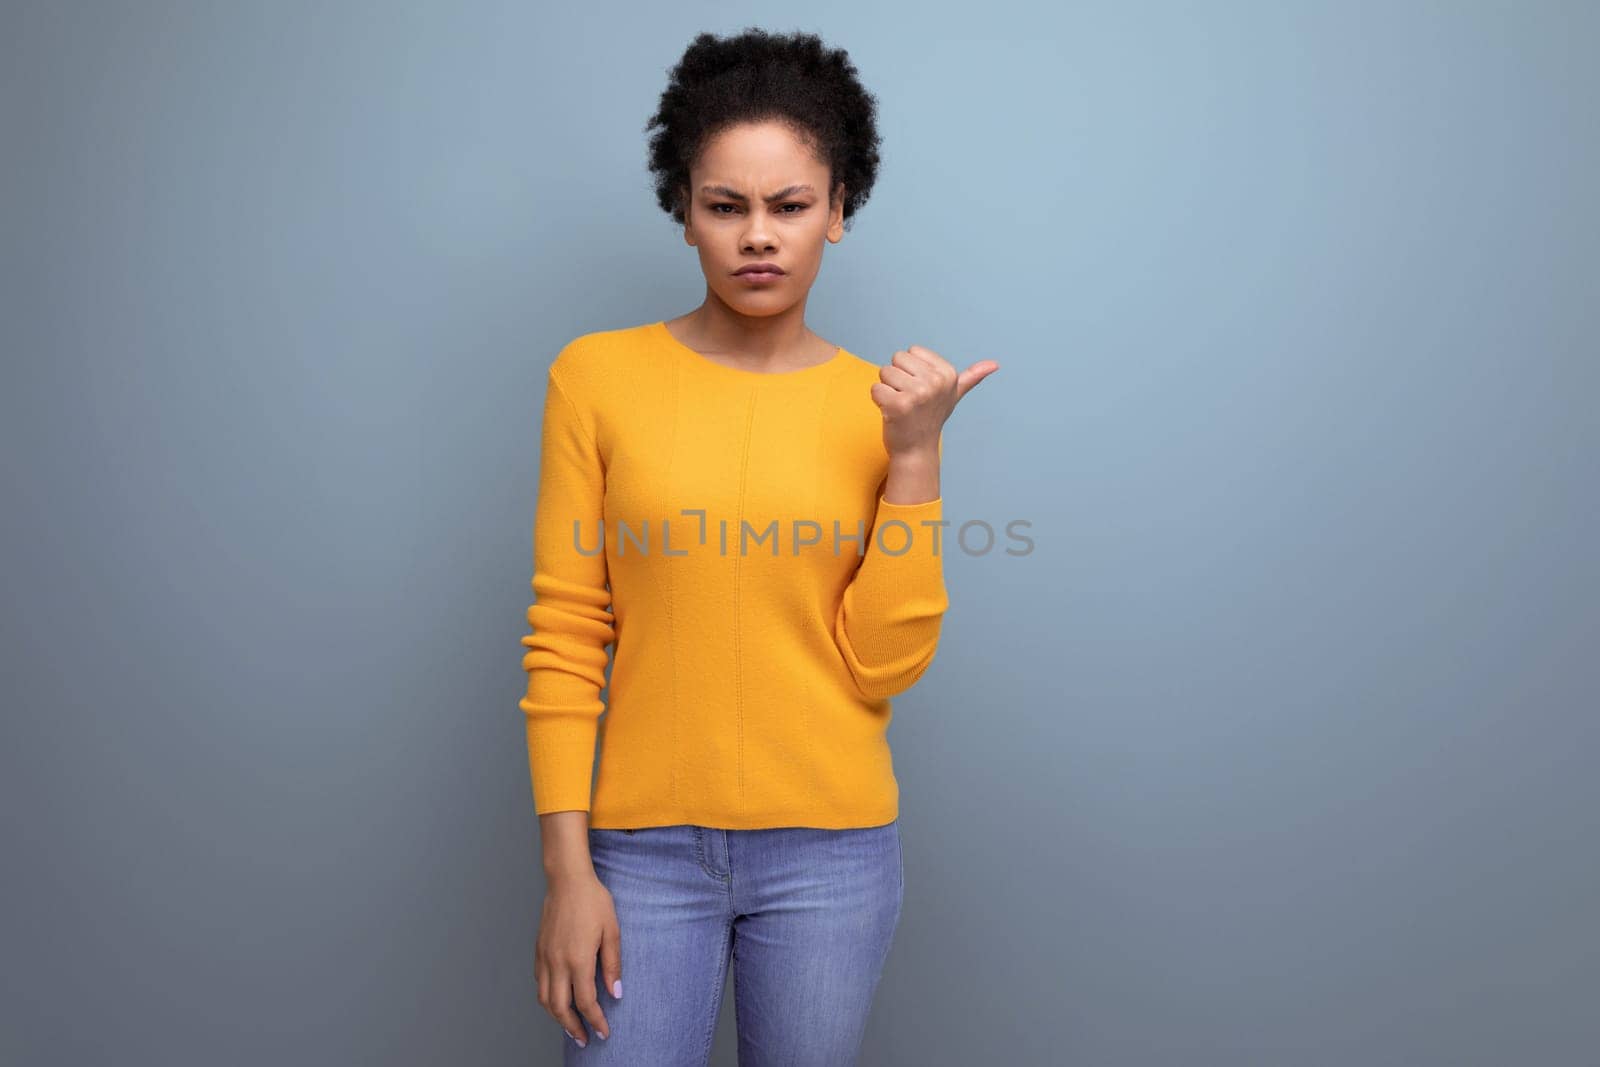 smart young latin woman with afro hair pointing finger to the side on gray background with copy space.